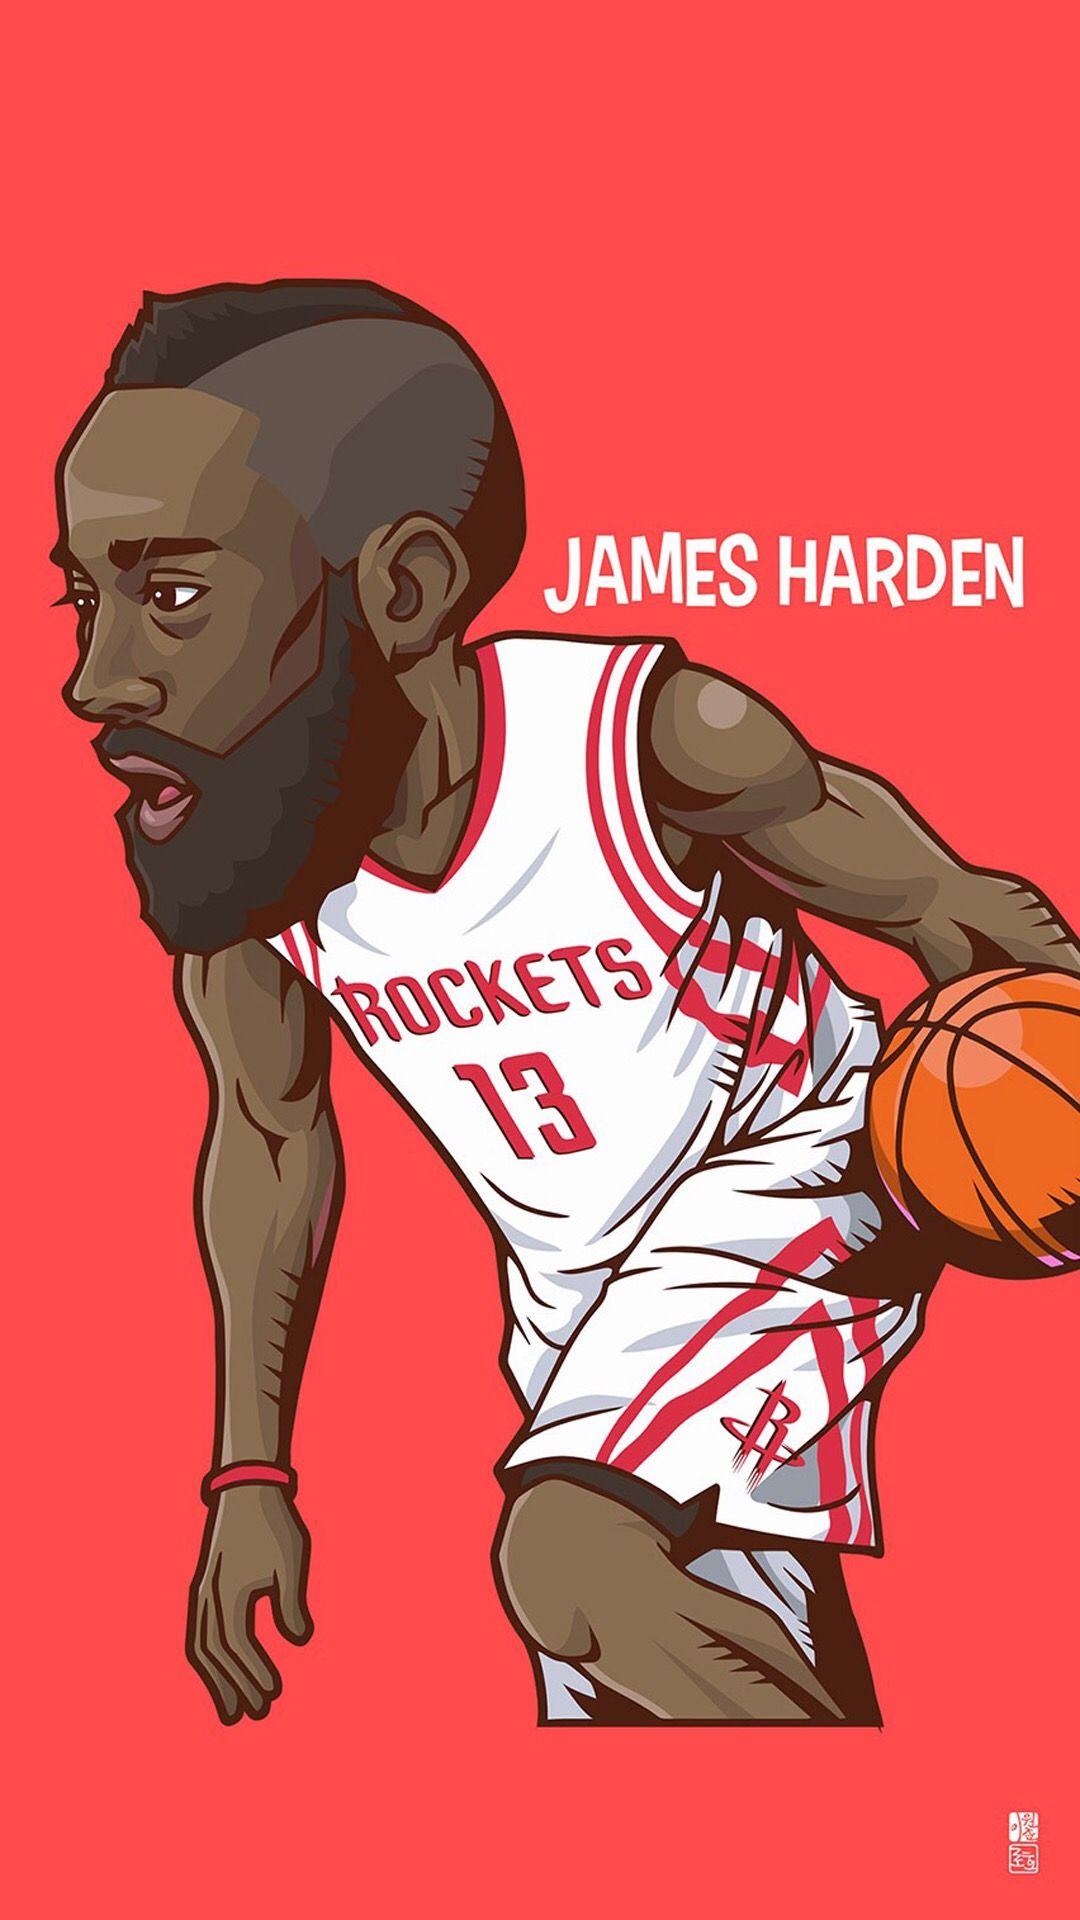 James Harden 1080 x 1920 Wallpaper available for free